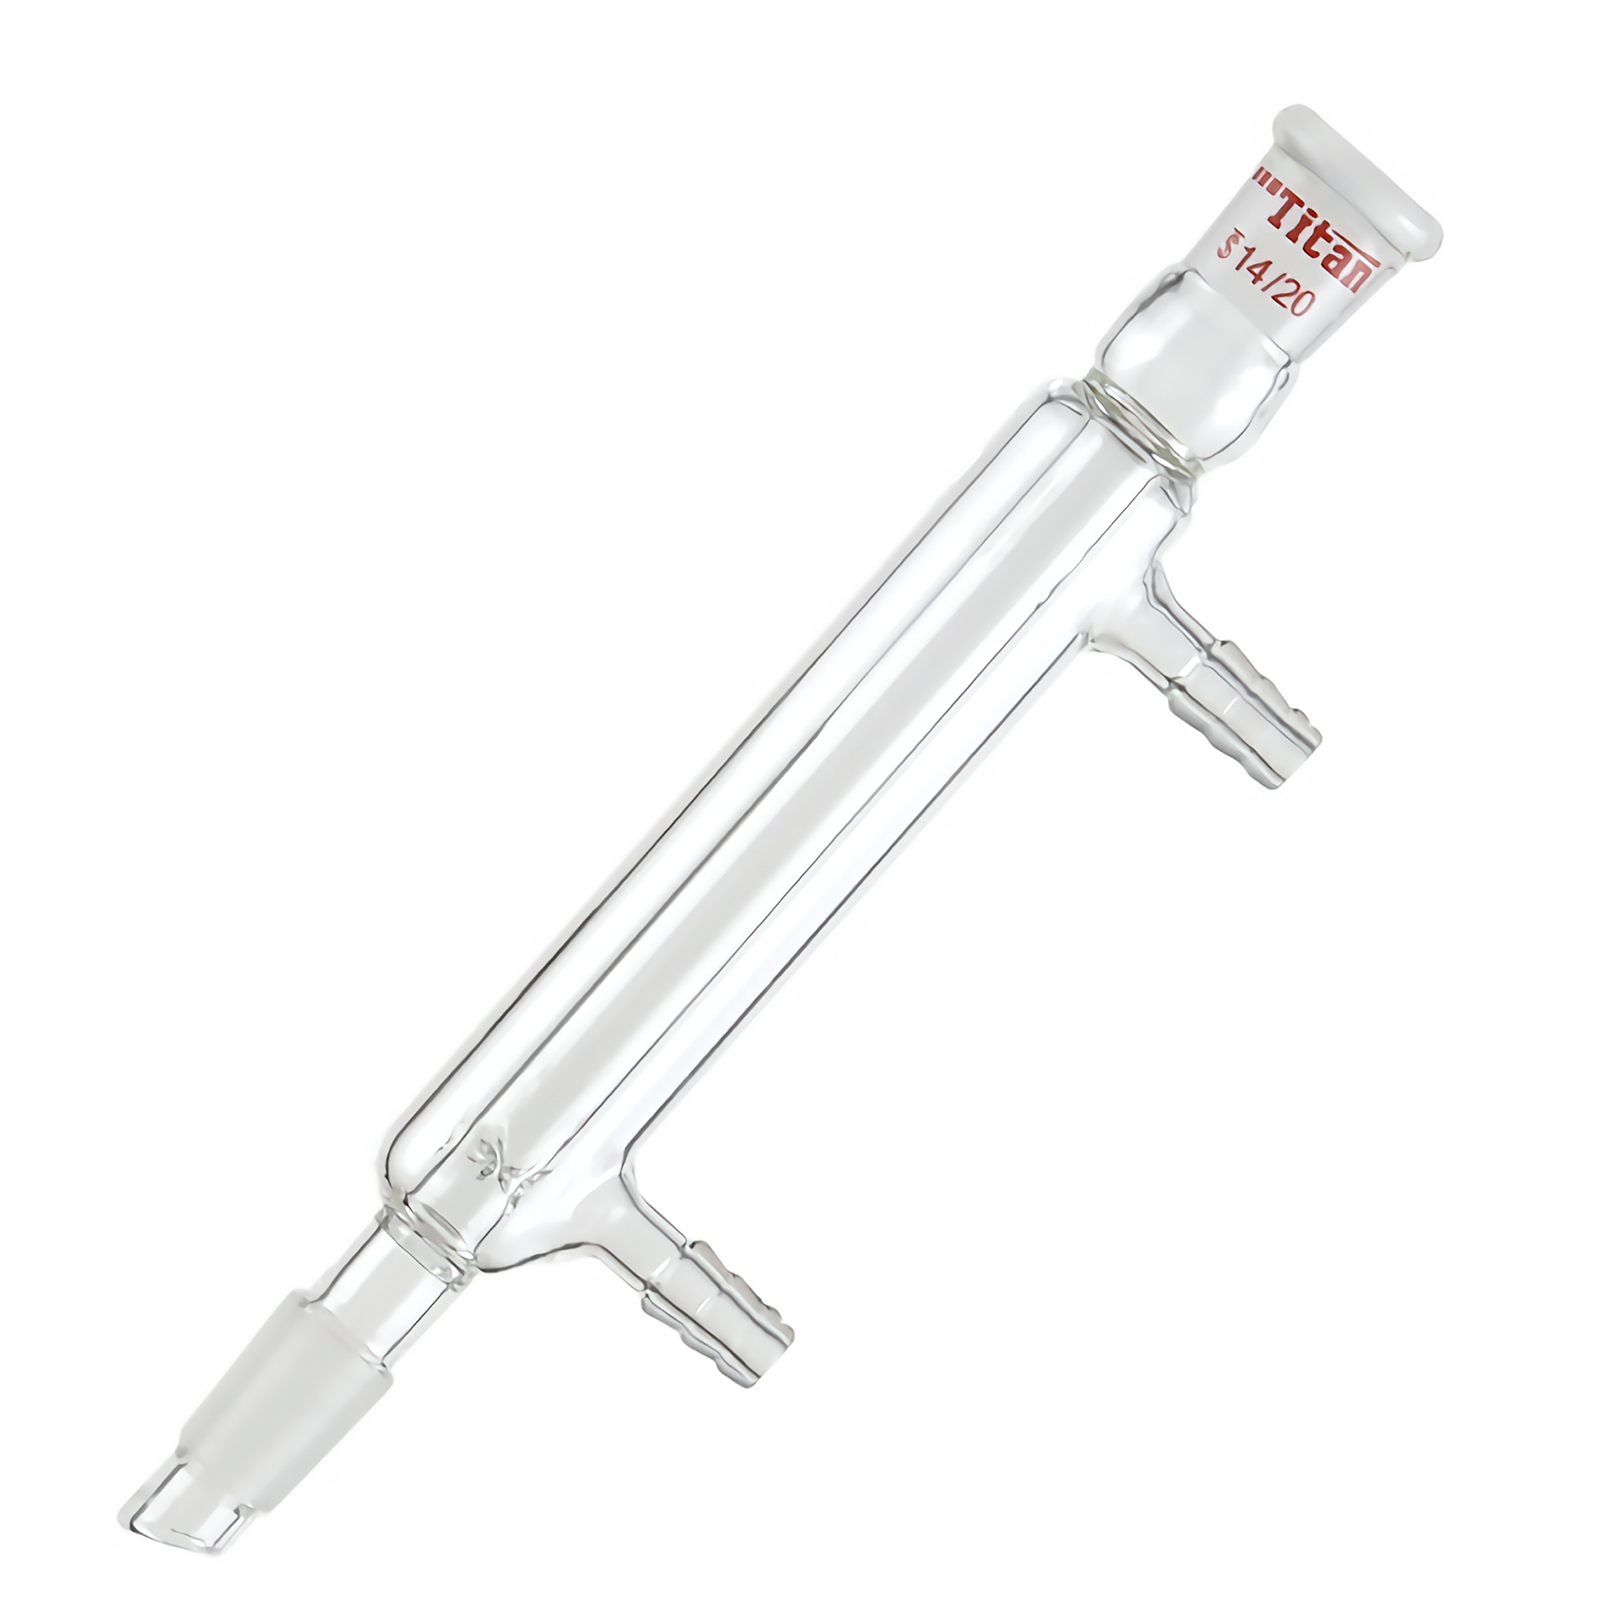 ADAMAS BETA 1pcs Sandwich Fractionation Column 180-330mm Grinding Mouth Laboratory Glass Straight Condenser Tube with Nozzle